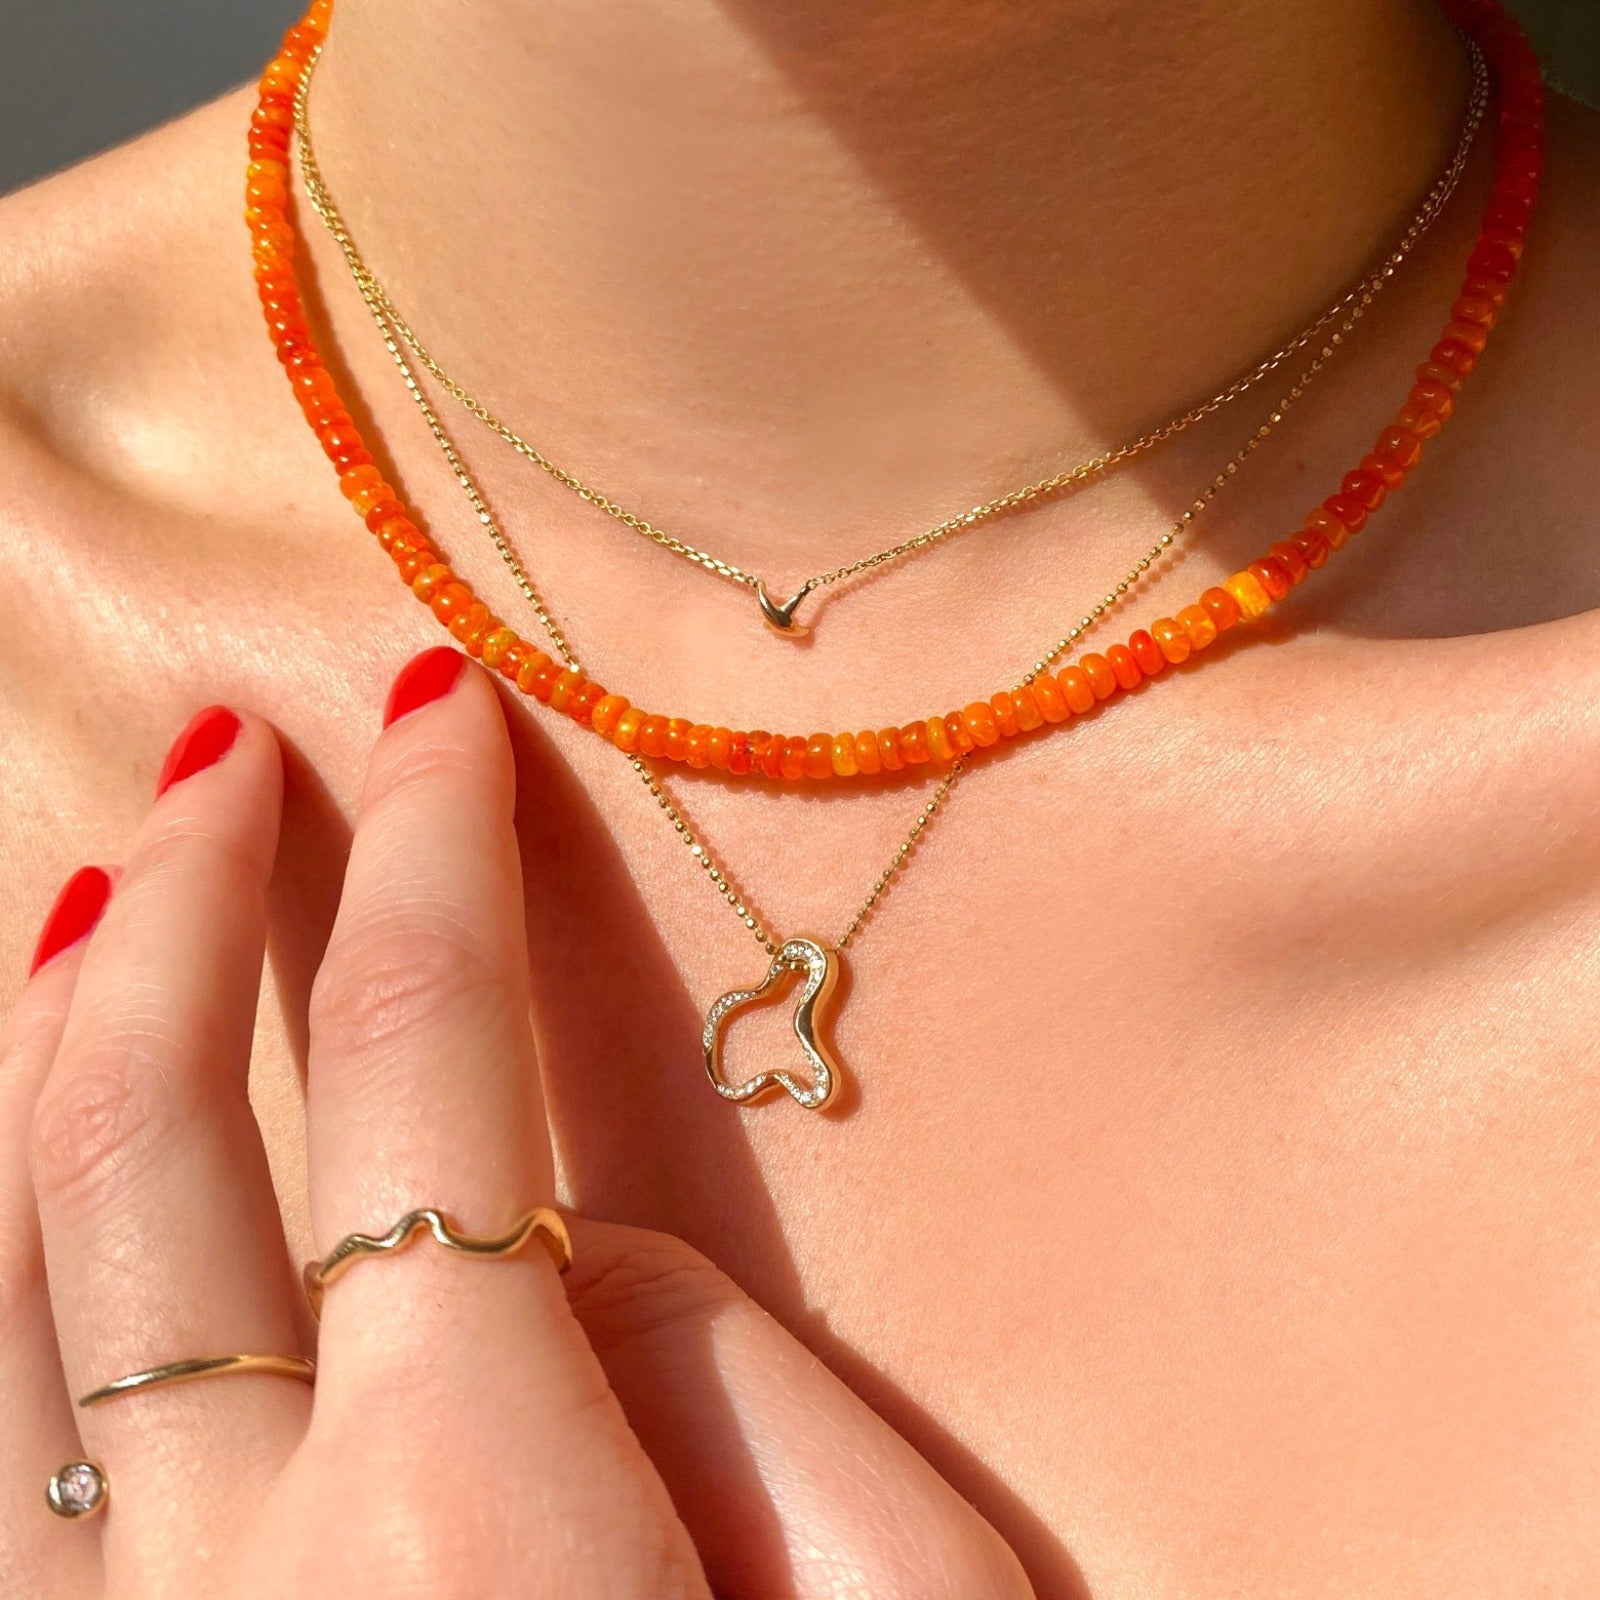 Shimmering beaded necklace made of smooth opal rondels in shades of orange on a slim gold lobster clasp. Styled on a neck layered with the ripple charm and stitch necklace.